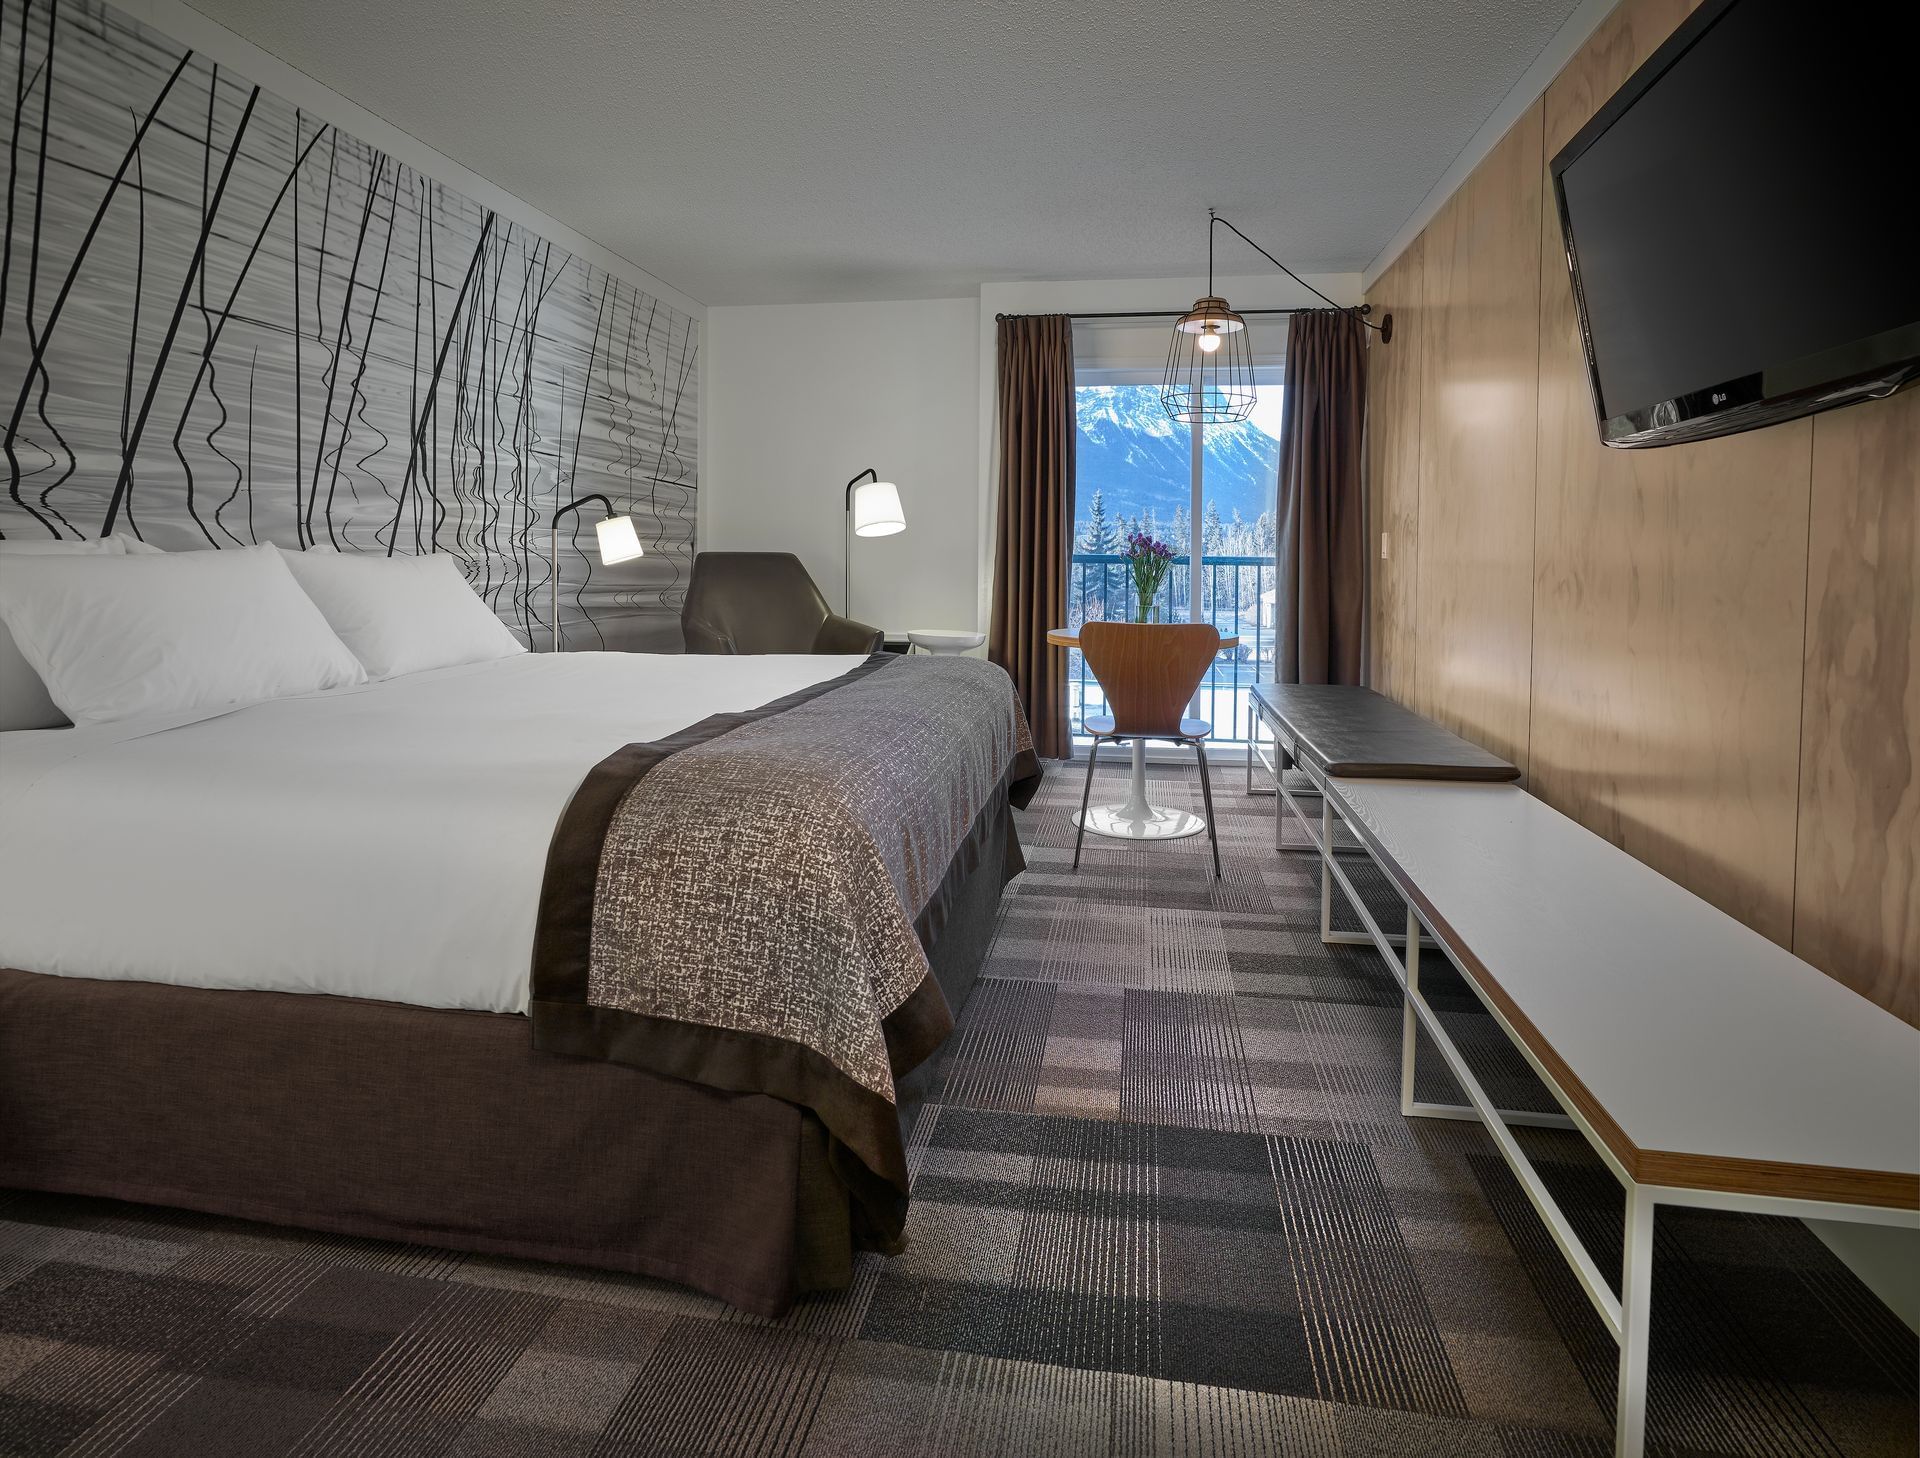 King bed and TV in modern hotel room with mountain views